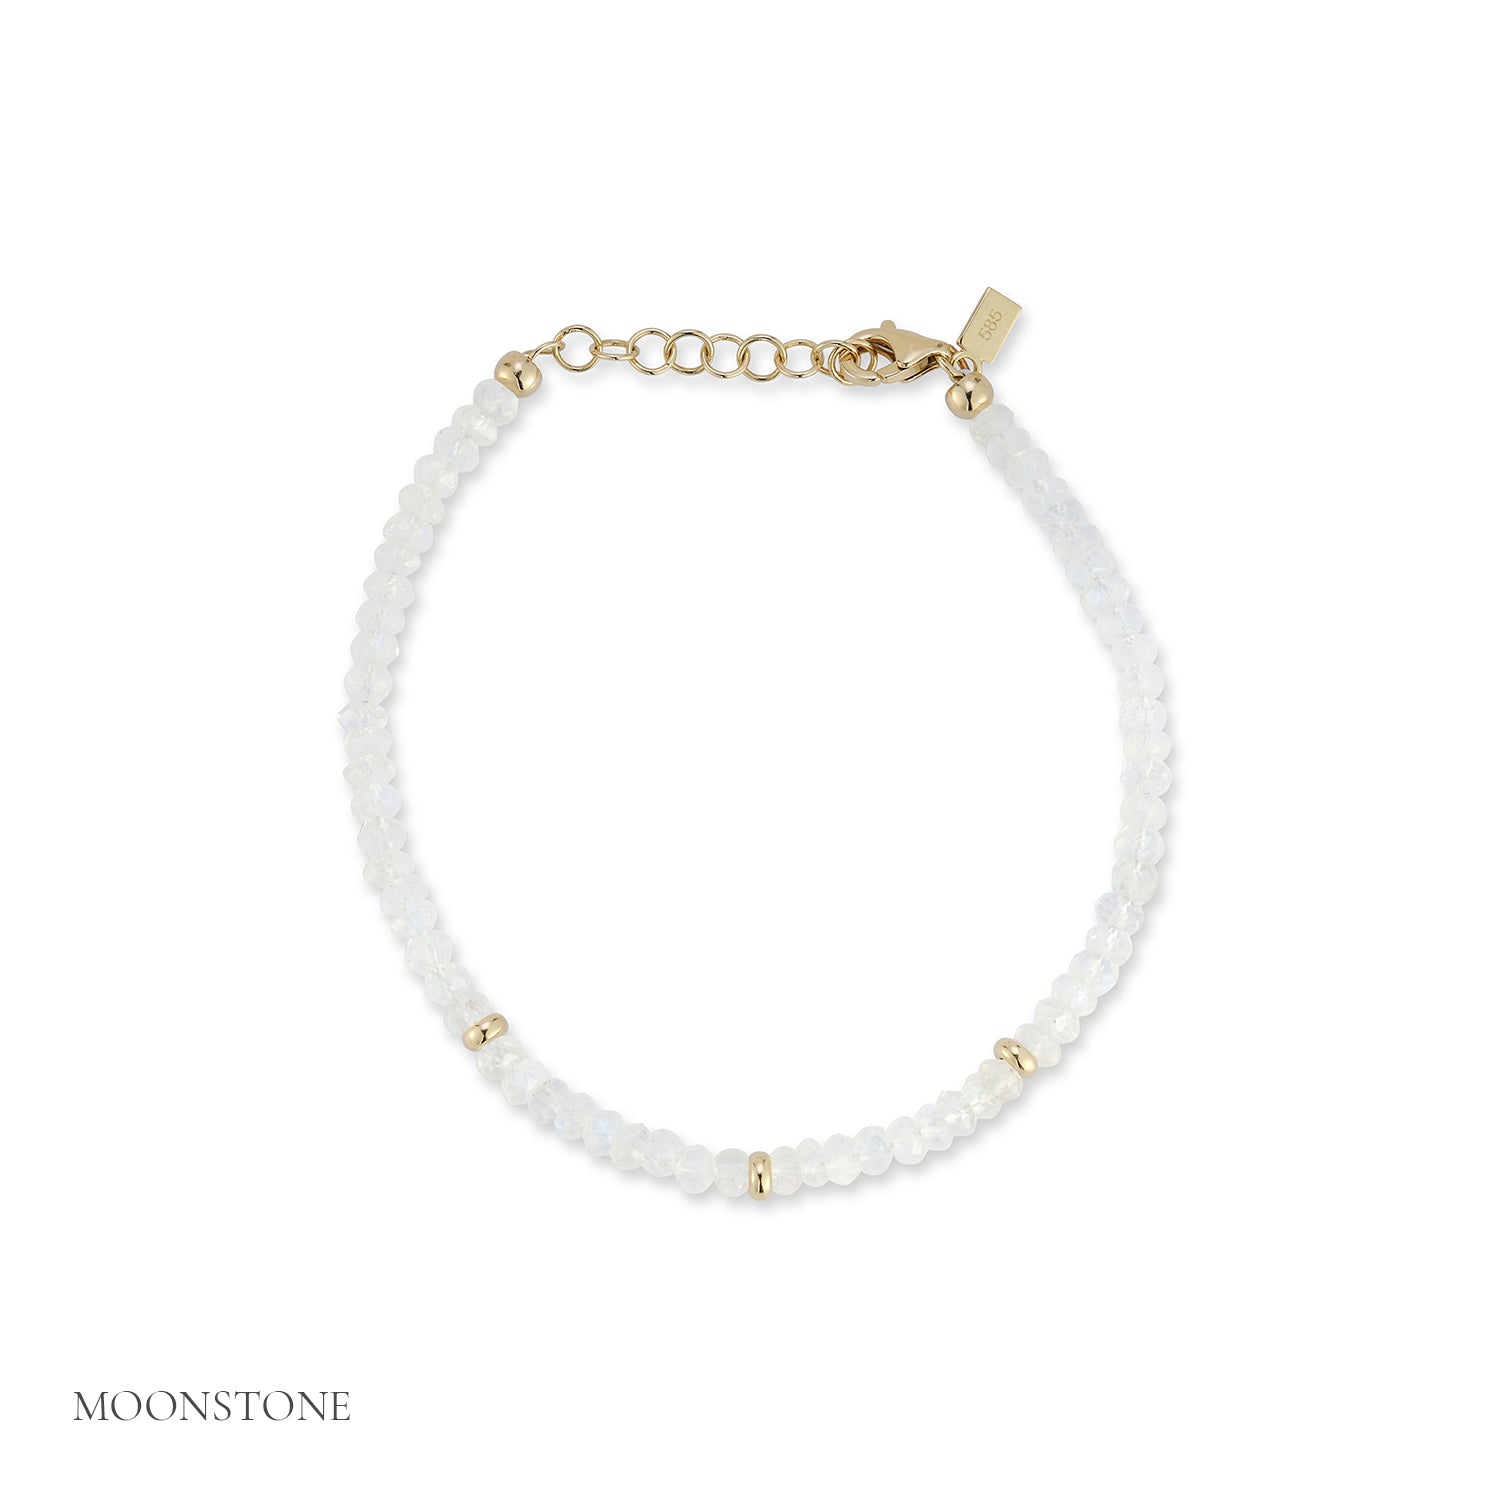 Birthstone Bead Bracelet In Moon Stone with 14k yellow gold chain - June Option